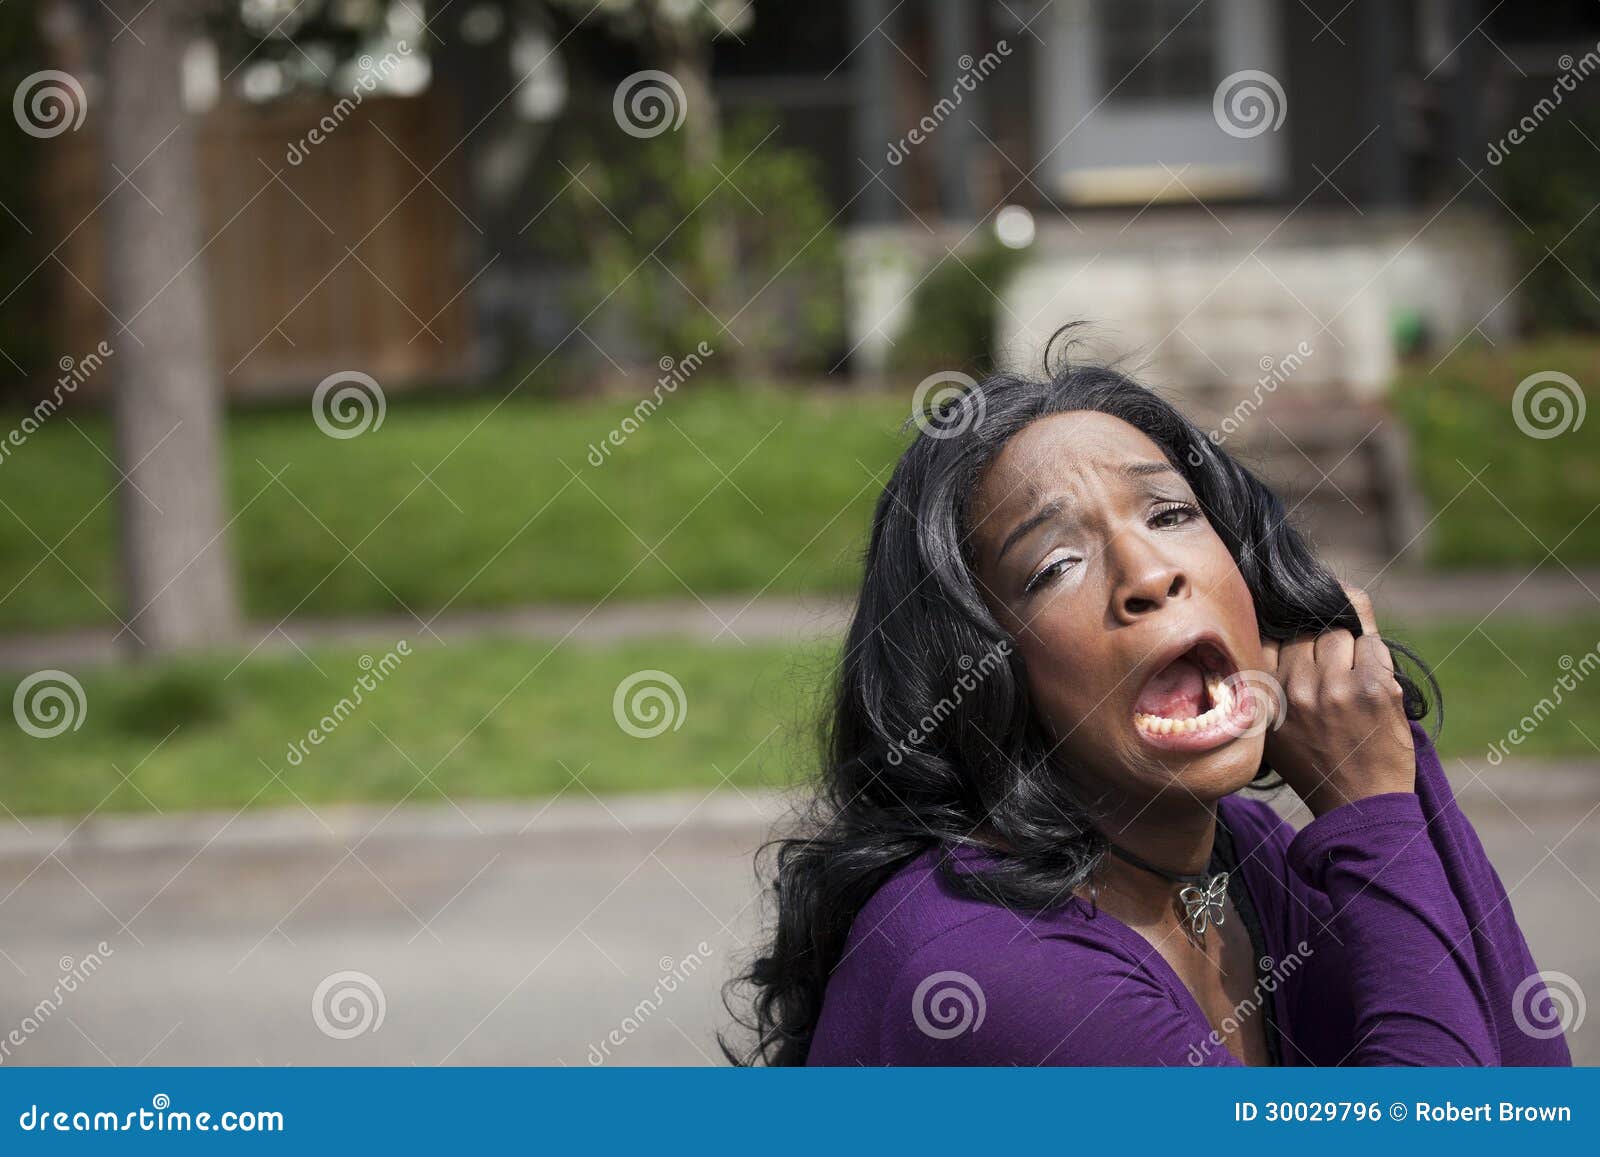 horrified young african american woman in purple top